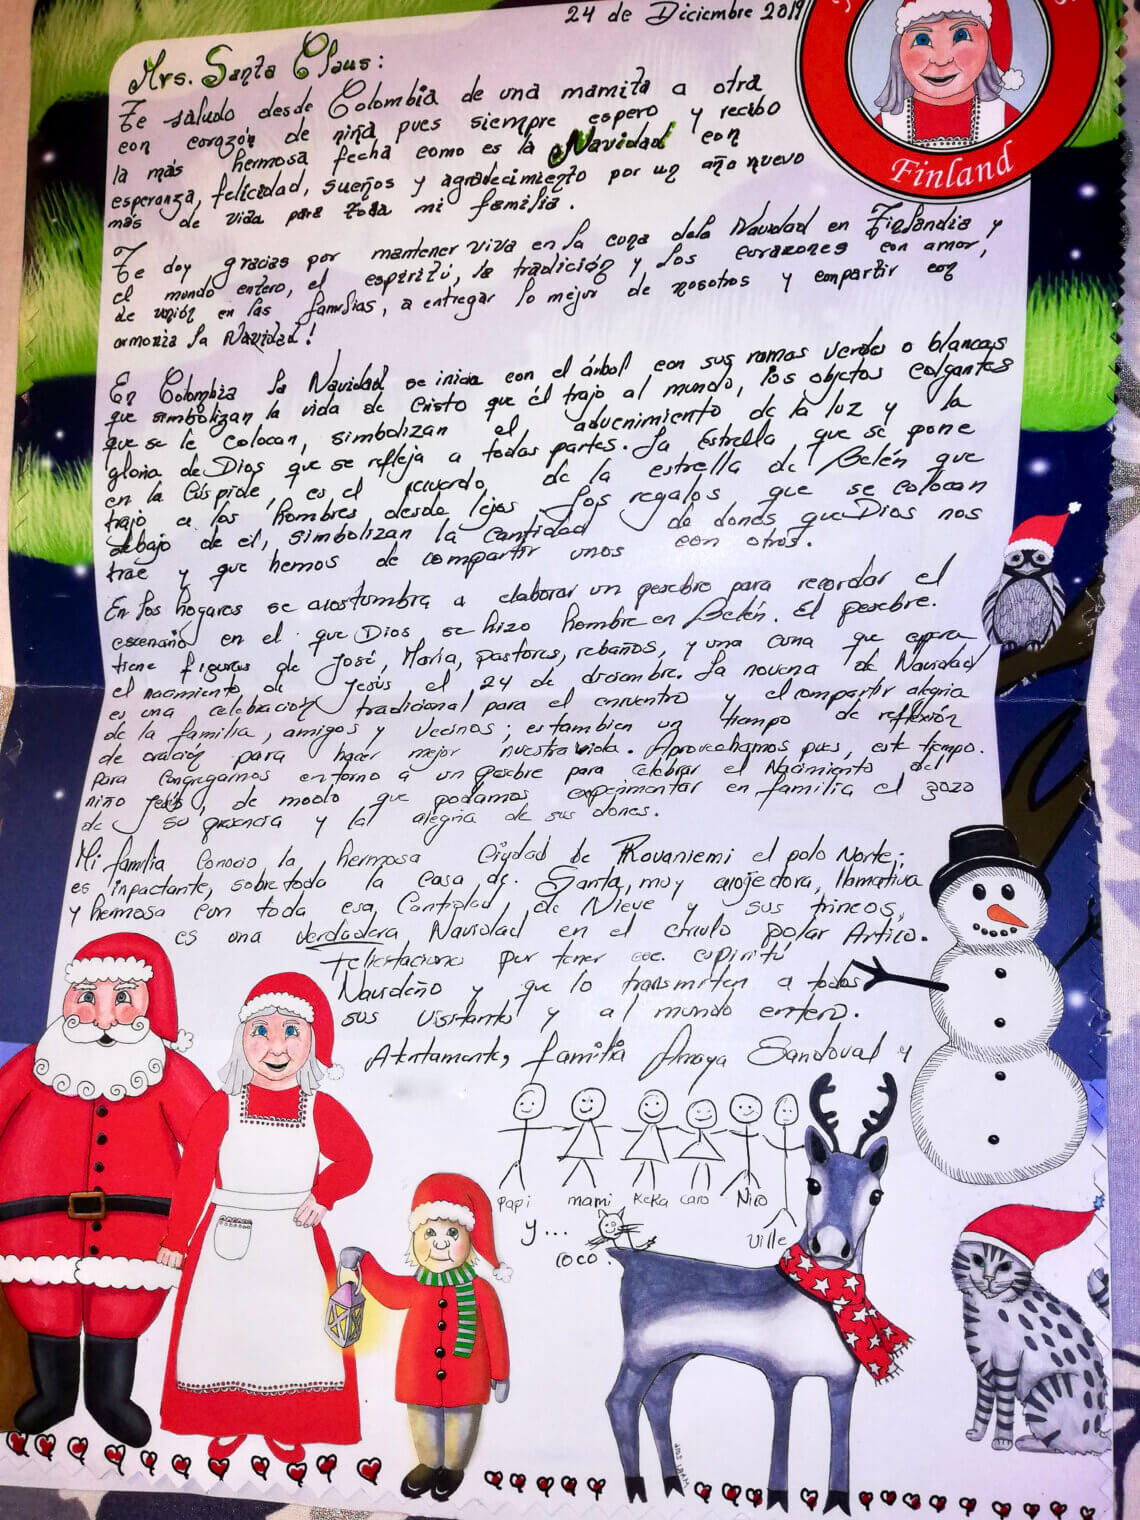 A letter from Columbia tells in a beautiful way about celebrating Christmas there. It is cold and snowy in Finland, but it must be a lot warmer in Columbia. What a beautiful handwriting, too!